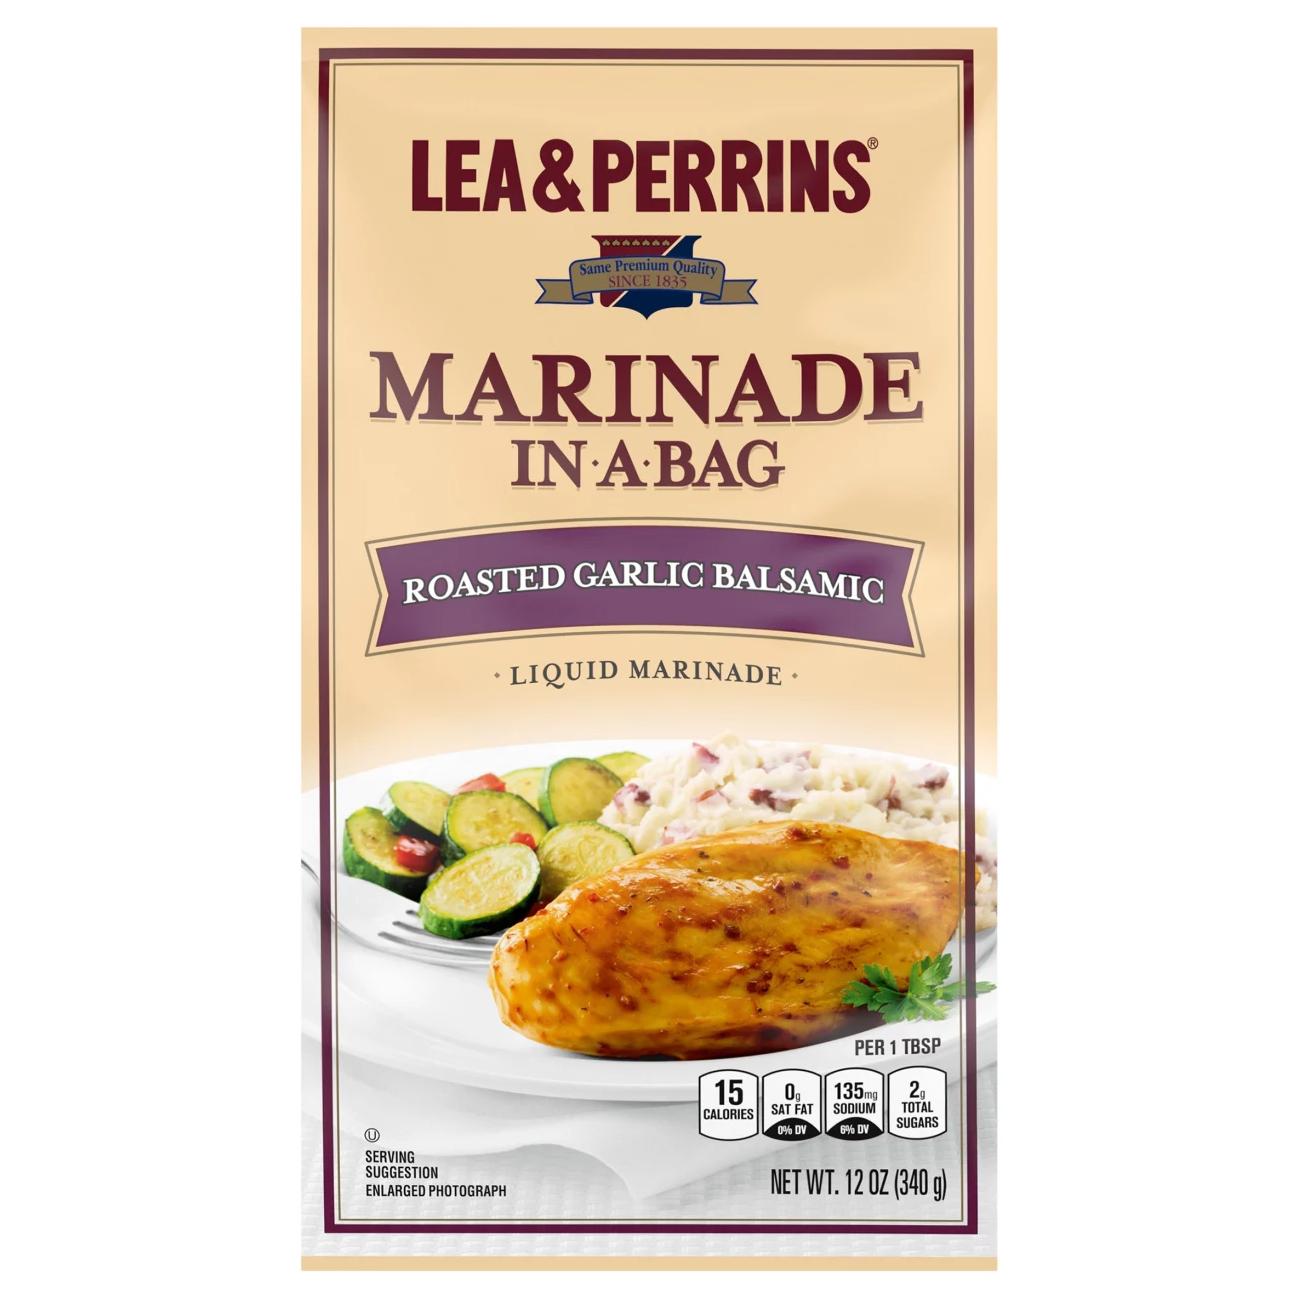  The tangy flavor of Lea & Perrins sauce adds a zesty punch to the dish.